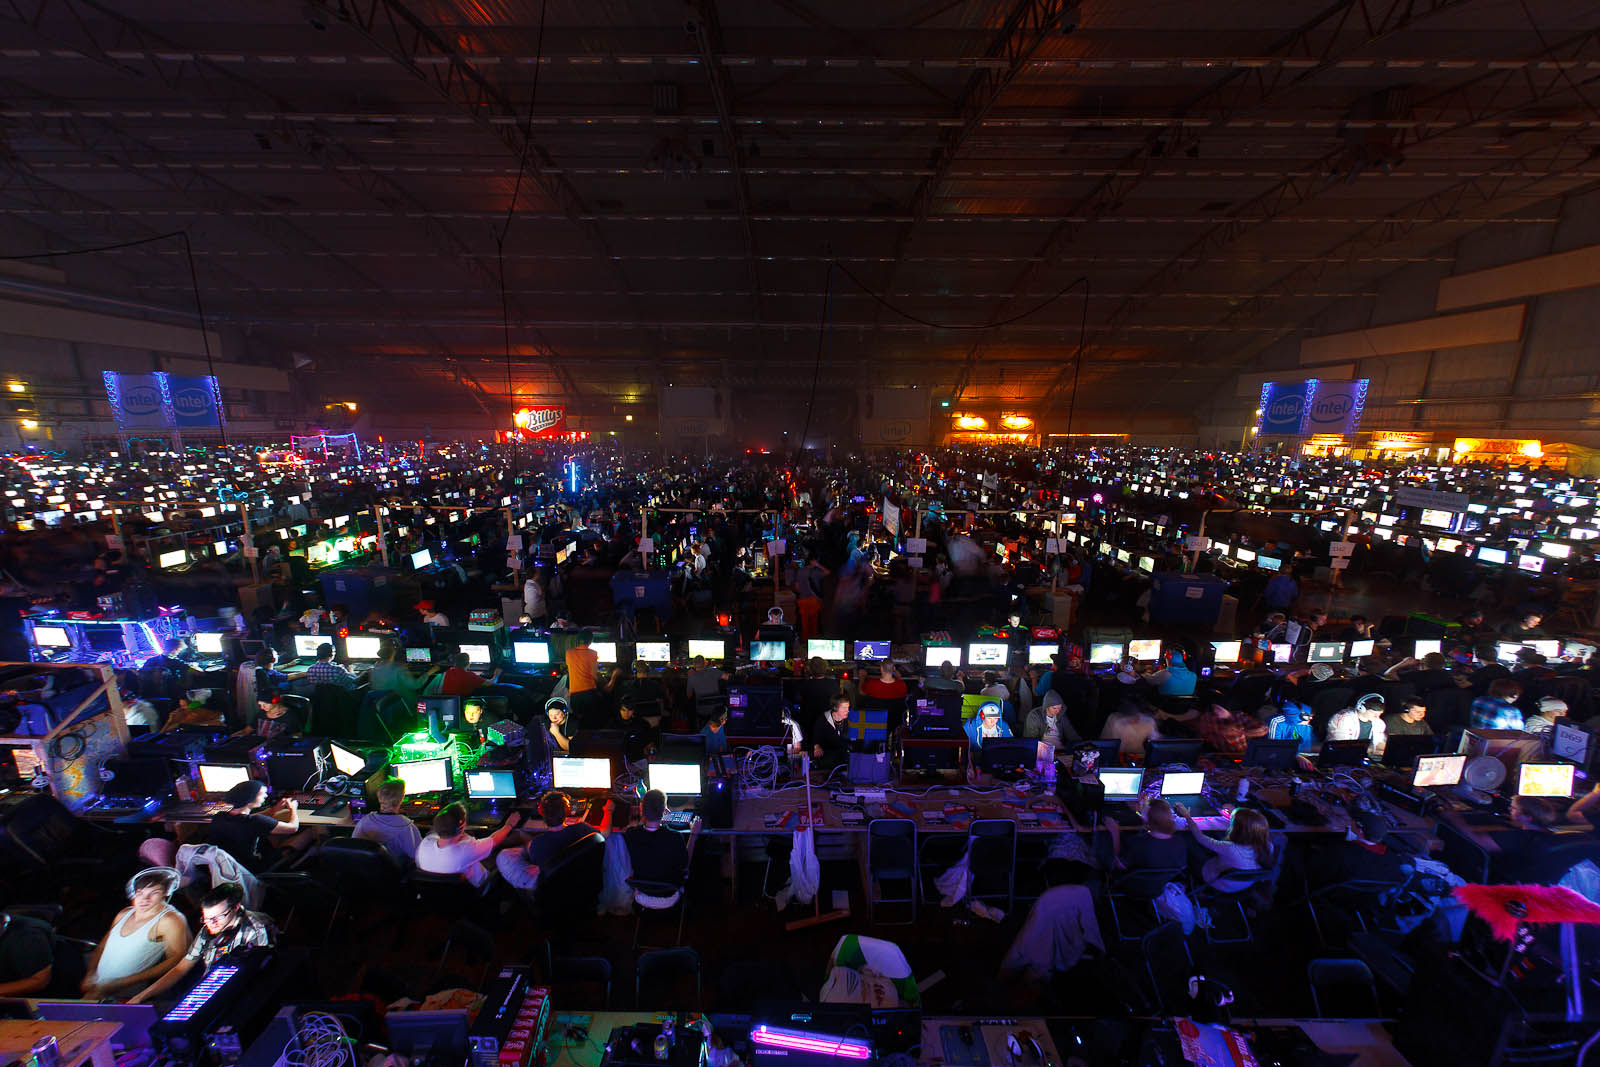 Lights out at DreamHack Winter 2011